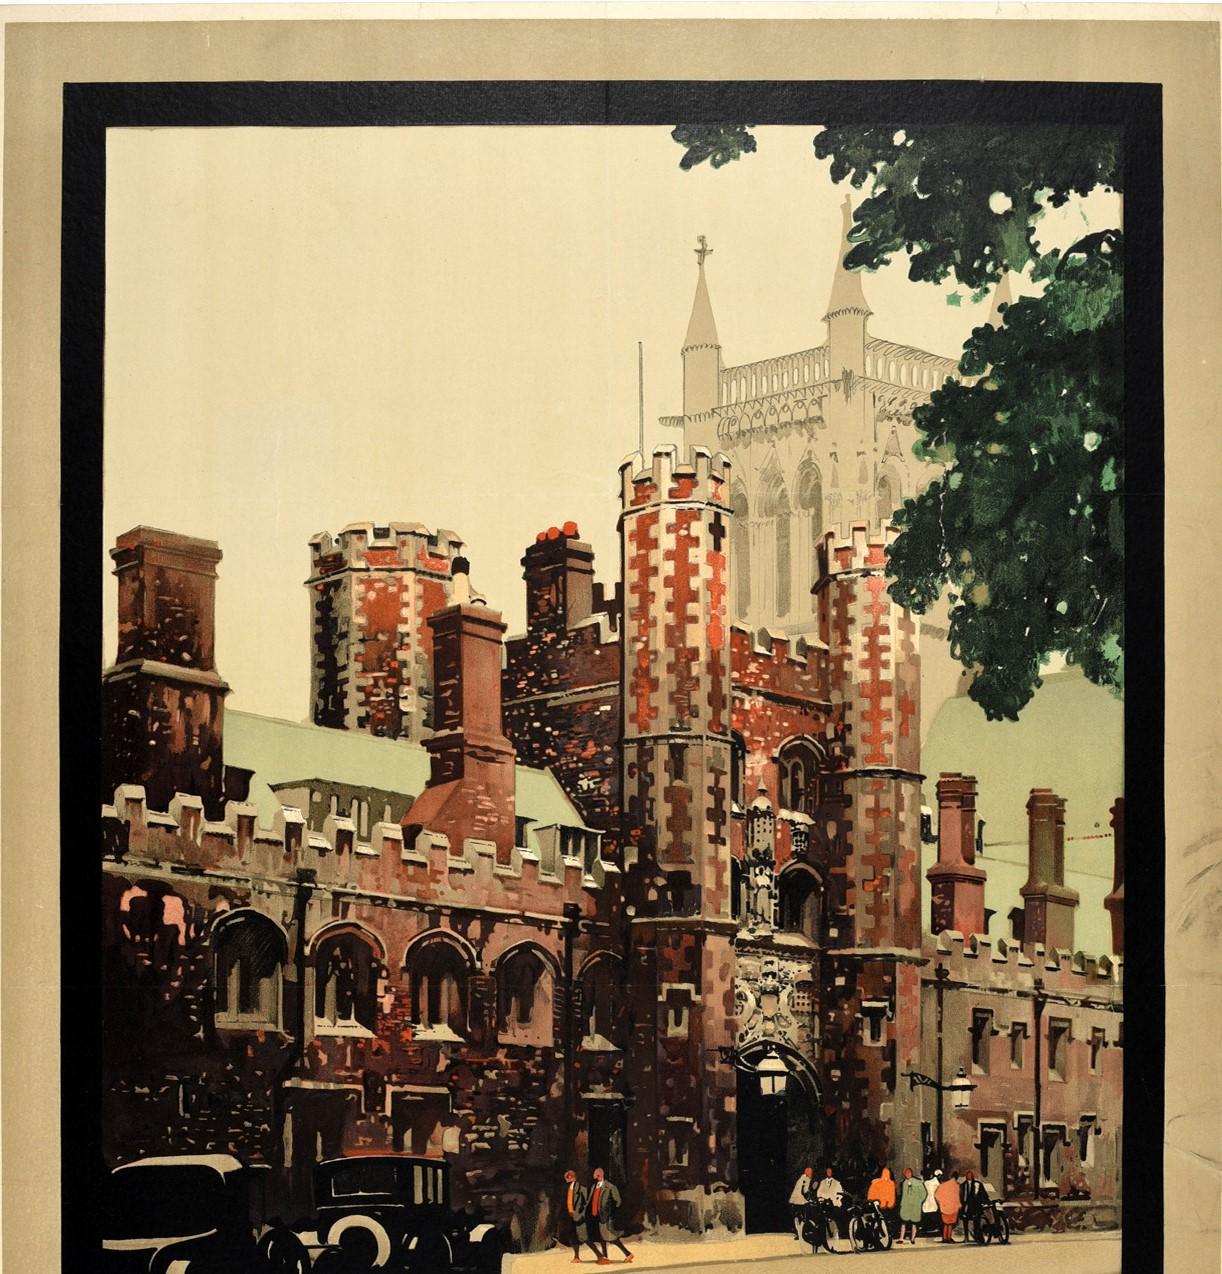 Original vintage travel poster advertising the historic university city of Cambridge on the London & North Eastern Railway of England and Scotland (LNER). Great design featuring artwork by Fred Taylor (1875-1963) depicting Classic cars and a group